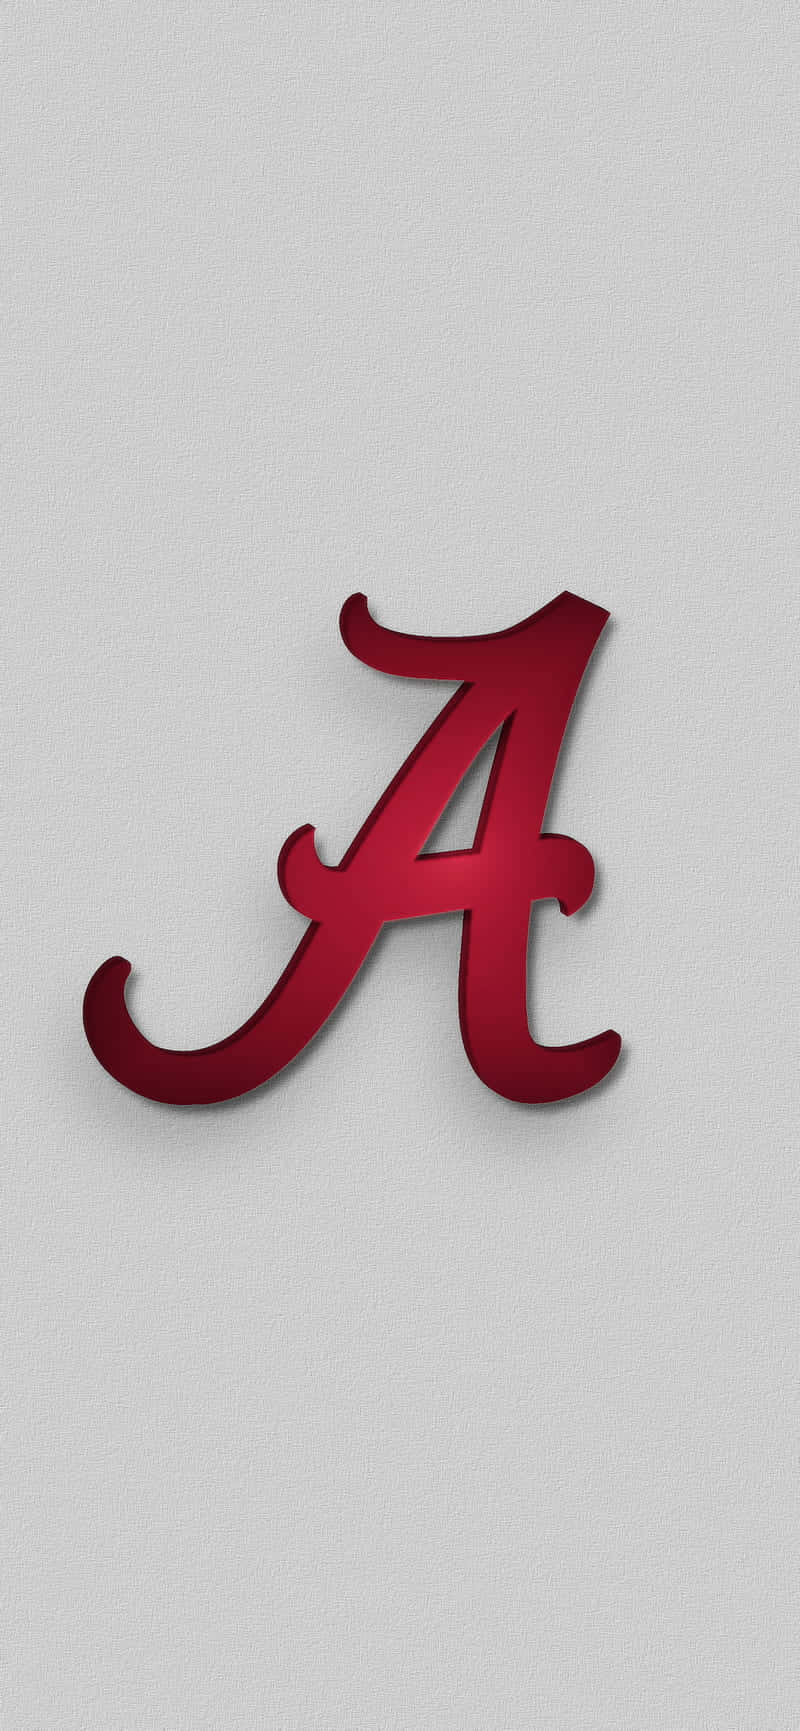 Watch Alabama football anytime, anywhere with the Iphone Wallpaper